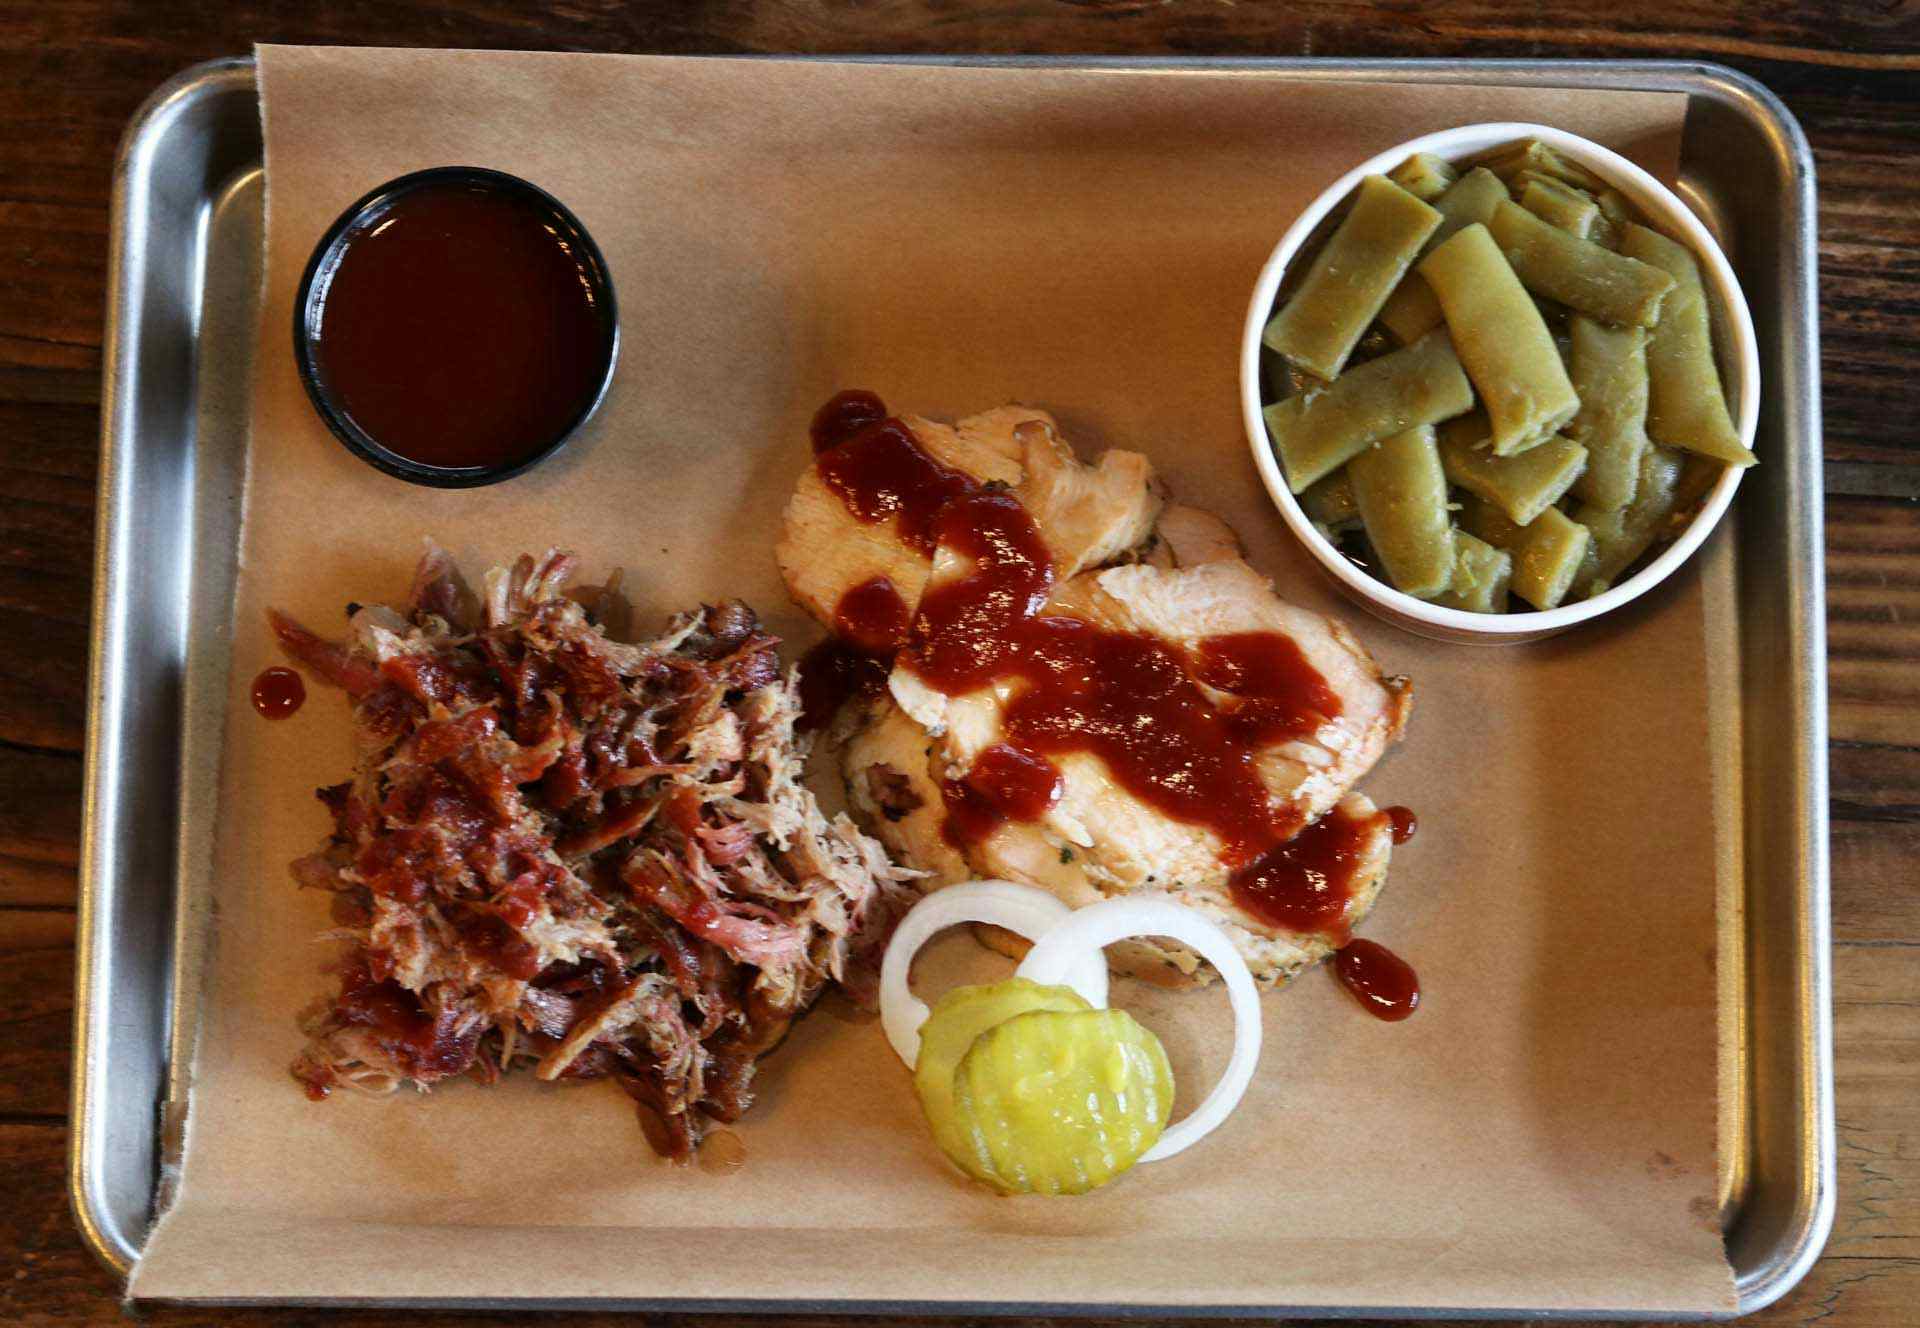 Dickey’s Barbecue Pit Rounds Up for Rancho Cordova